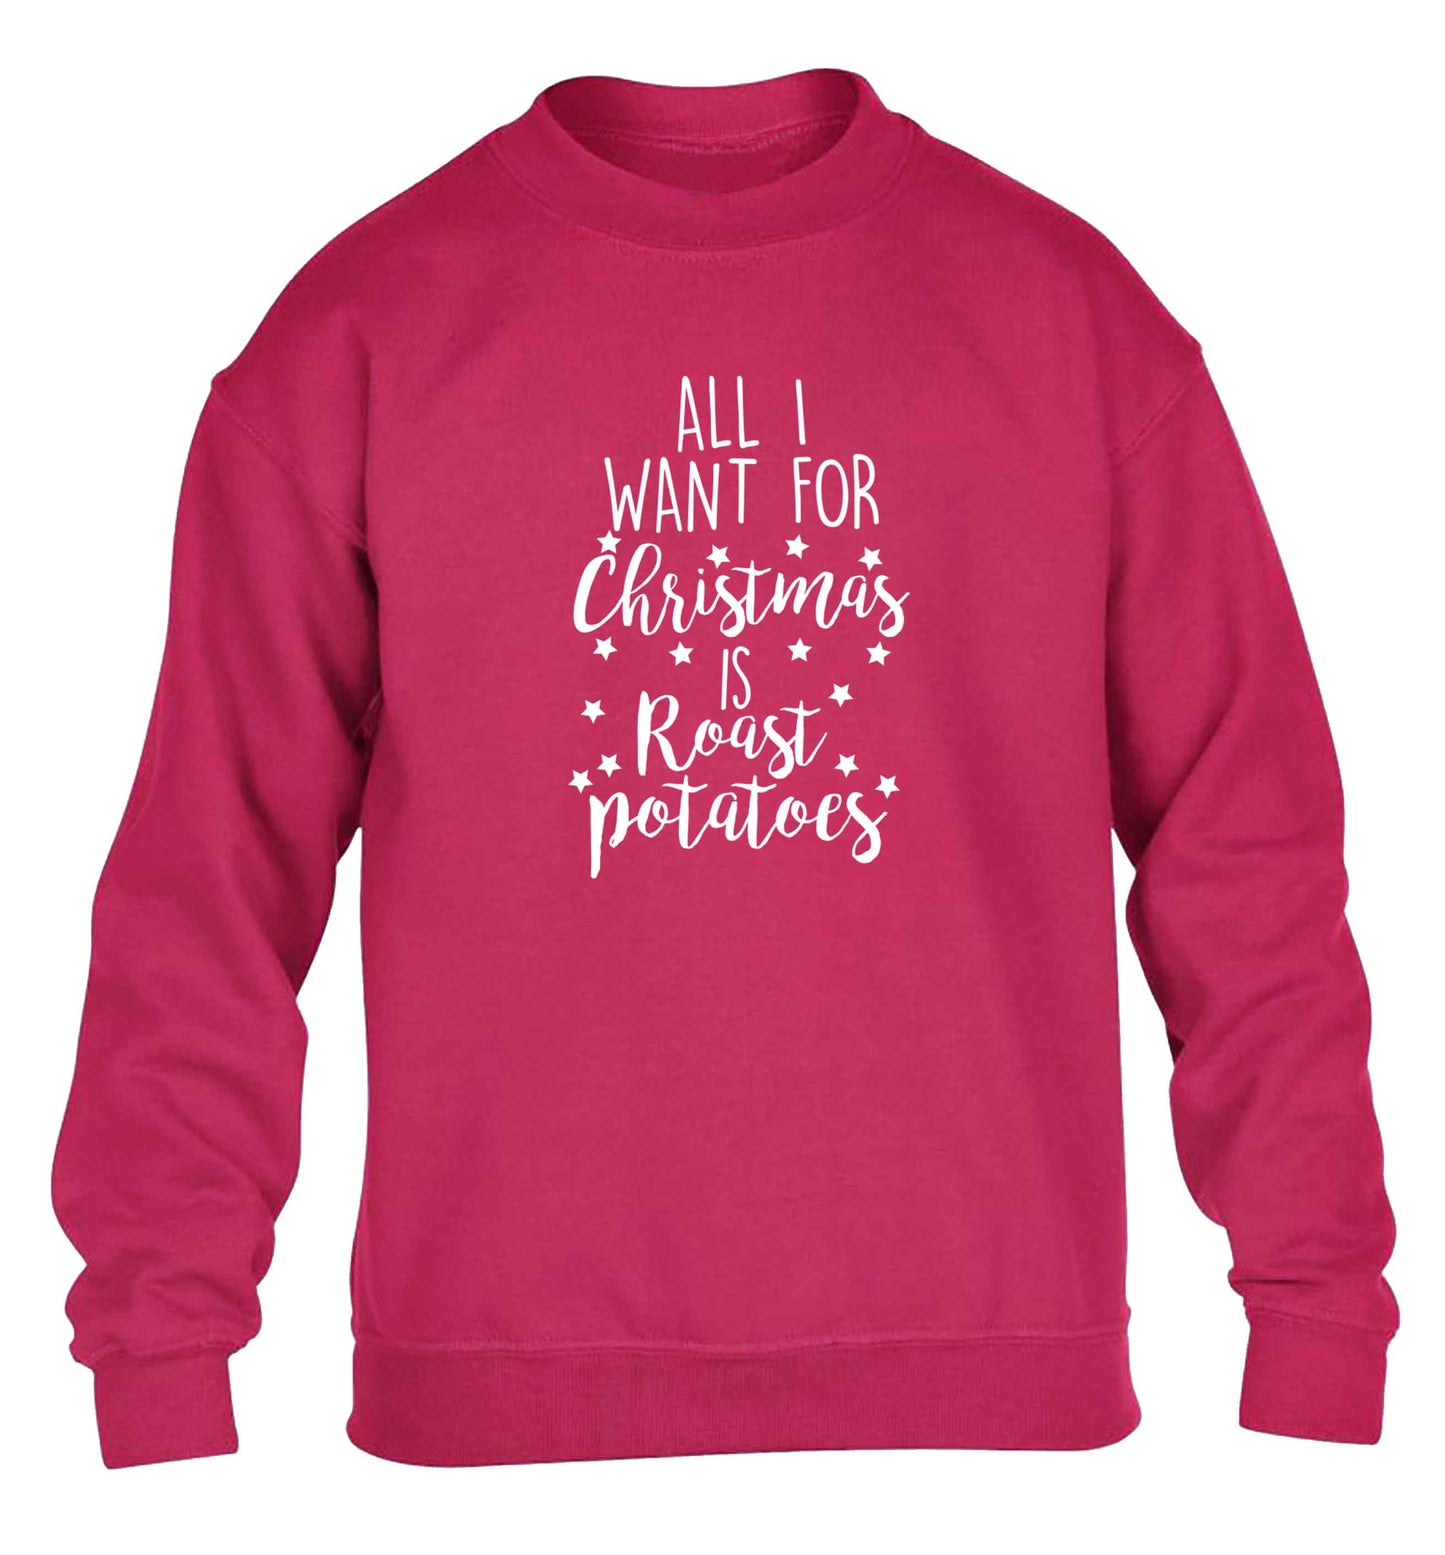 All I want for Christmas is roast potatoes children's pink sweater 12-13 Years